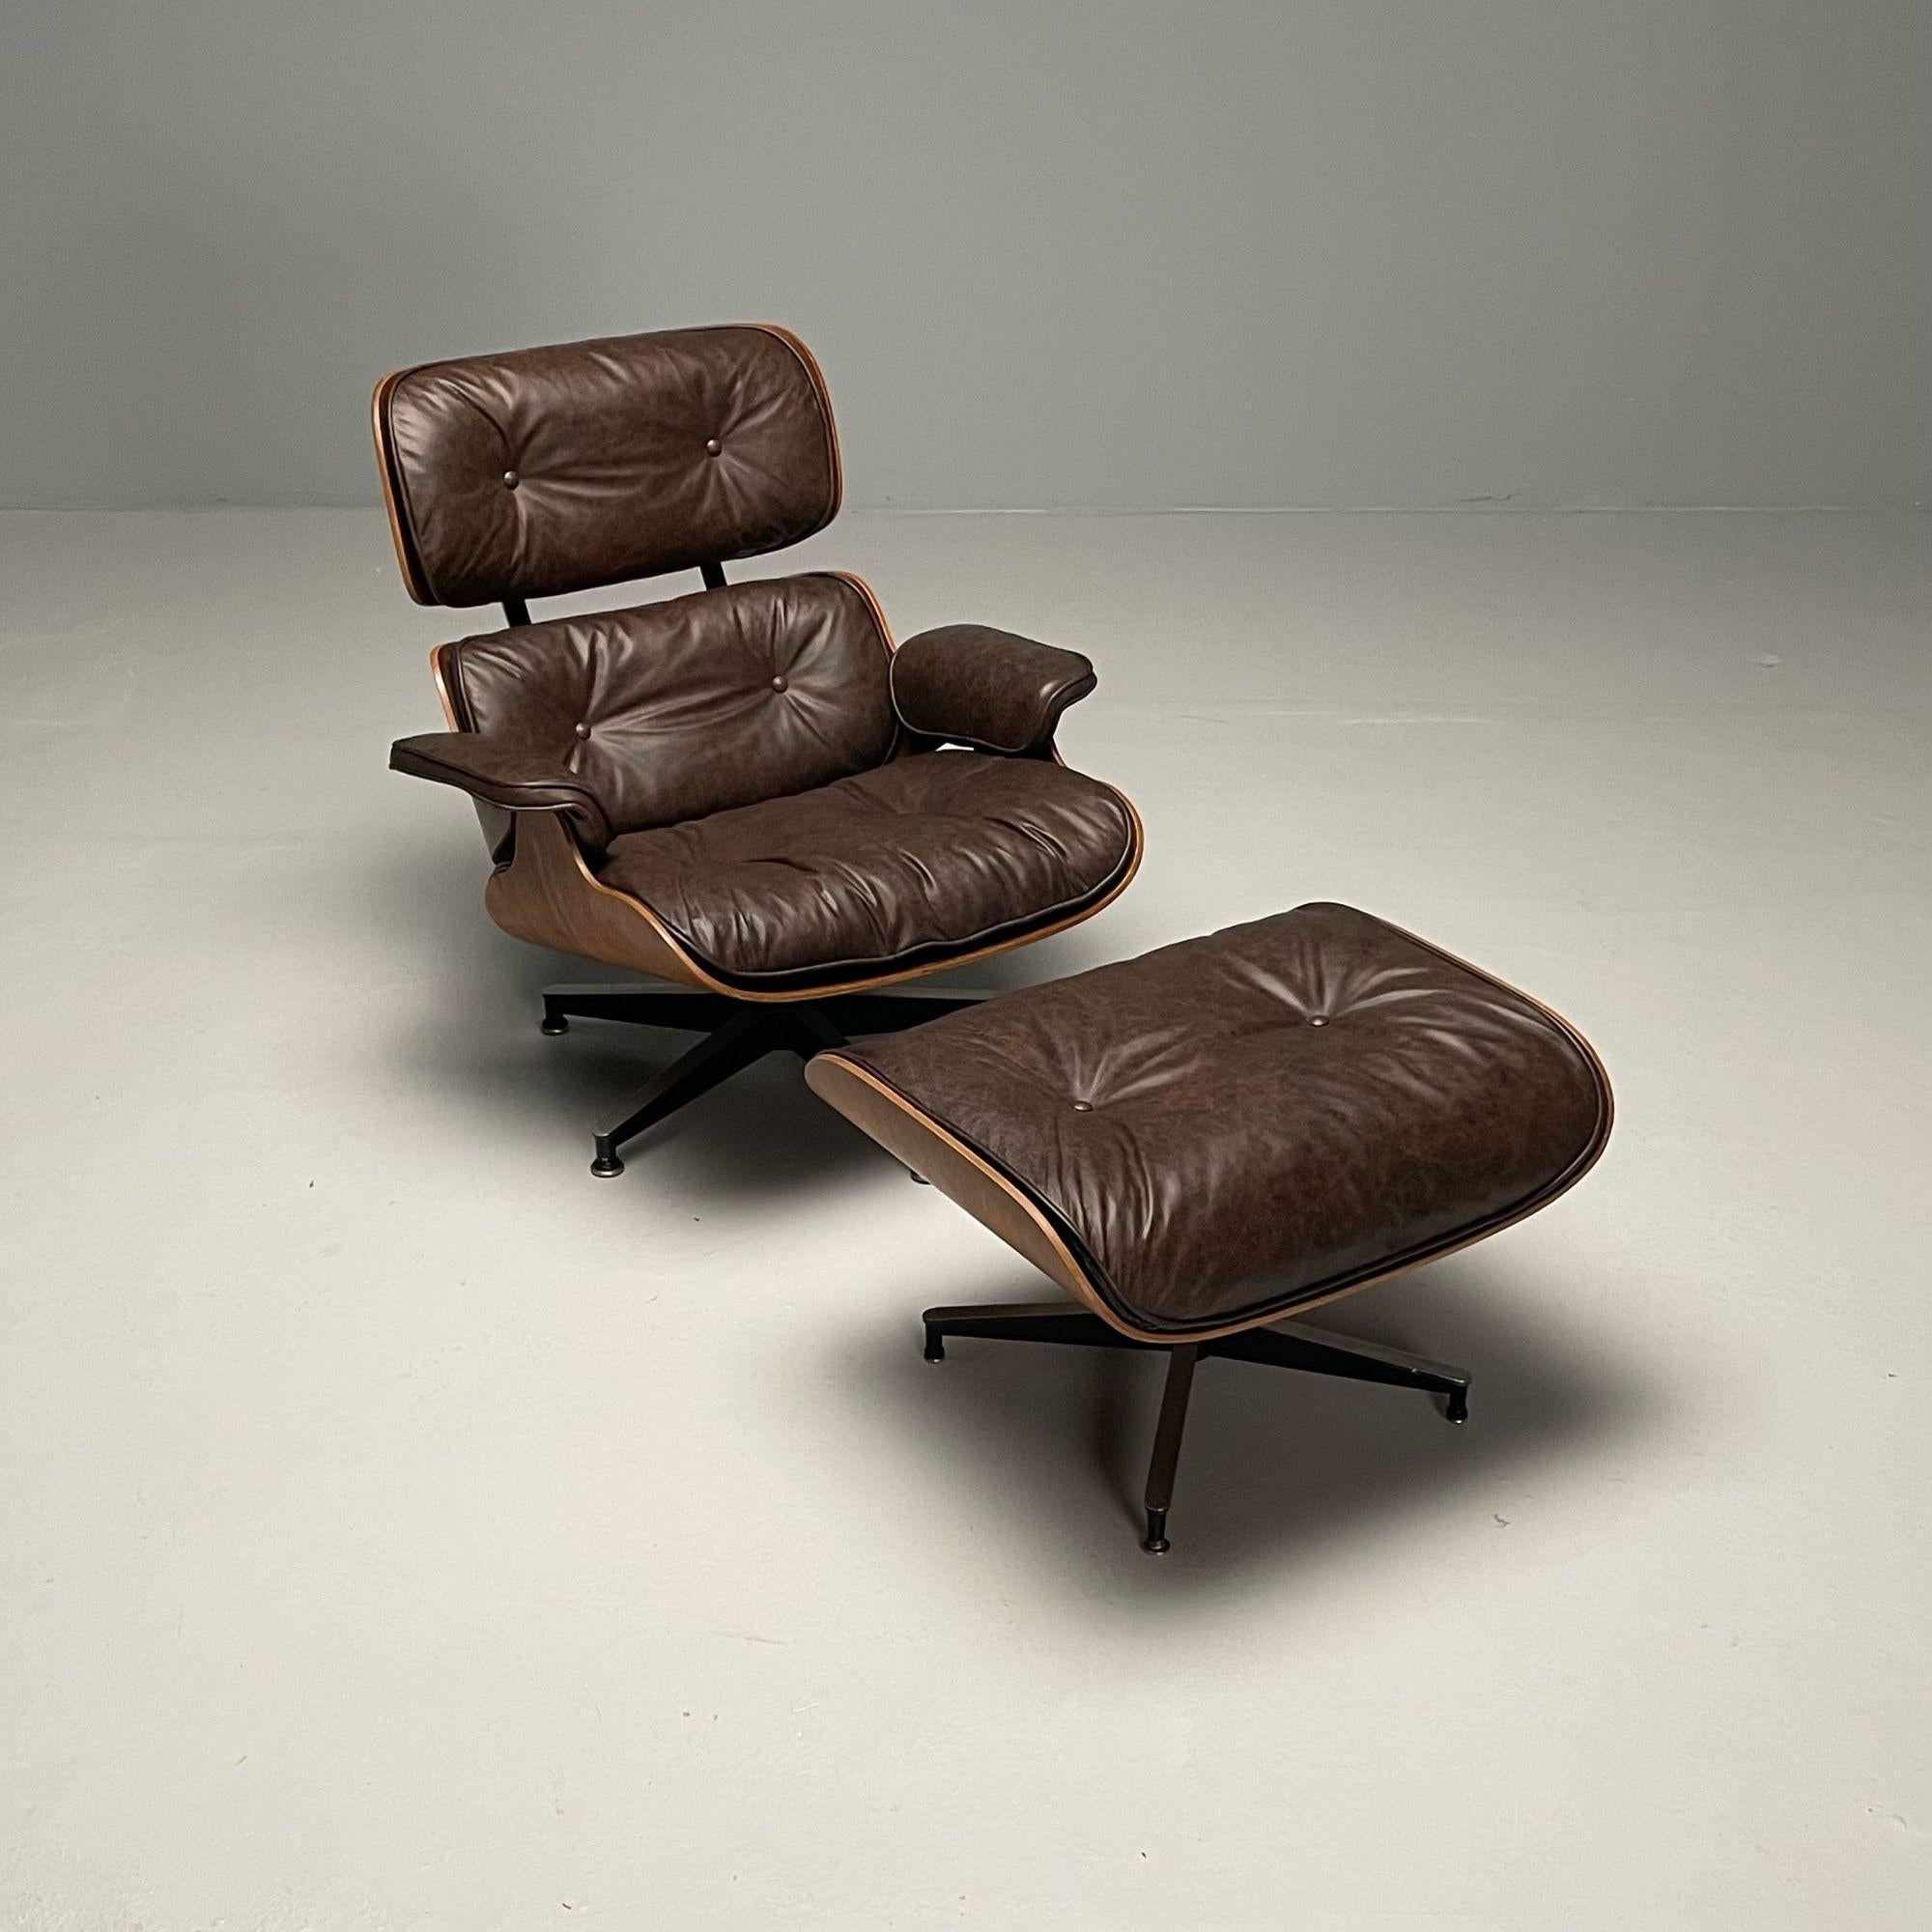 American Herman Miller, Mid-Century Modern, Eames Lounge Chair, Ottoman, USA, 1960s For Sale